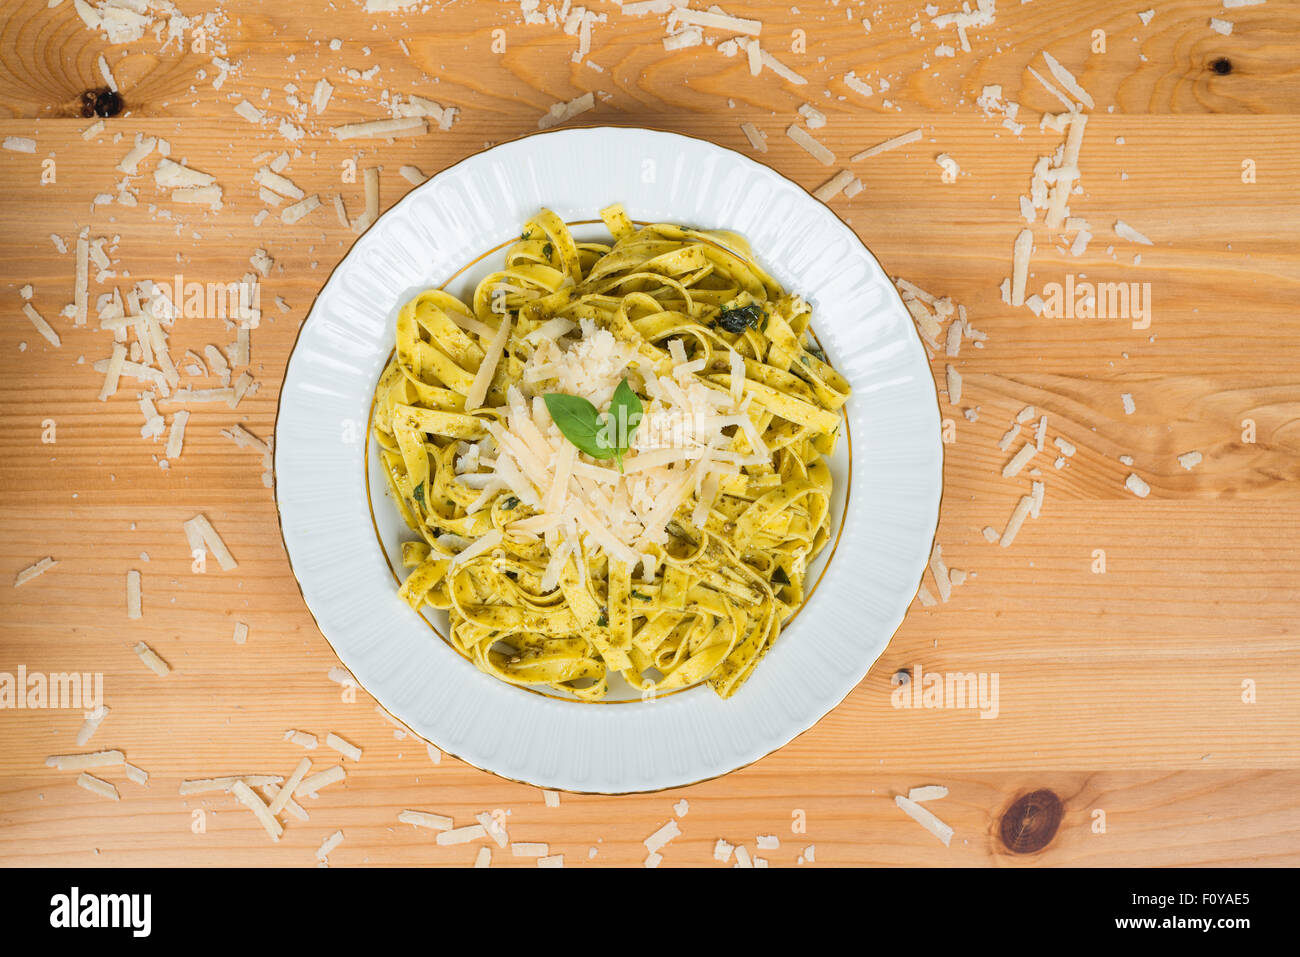 Tagliatelle pasta with pesto sauce and basil leafs on white plate, wood background Stock Photo